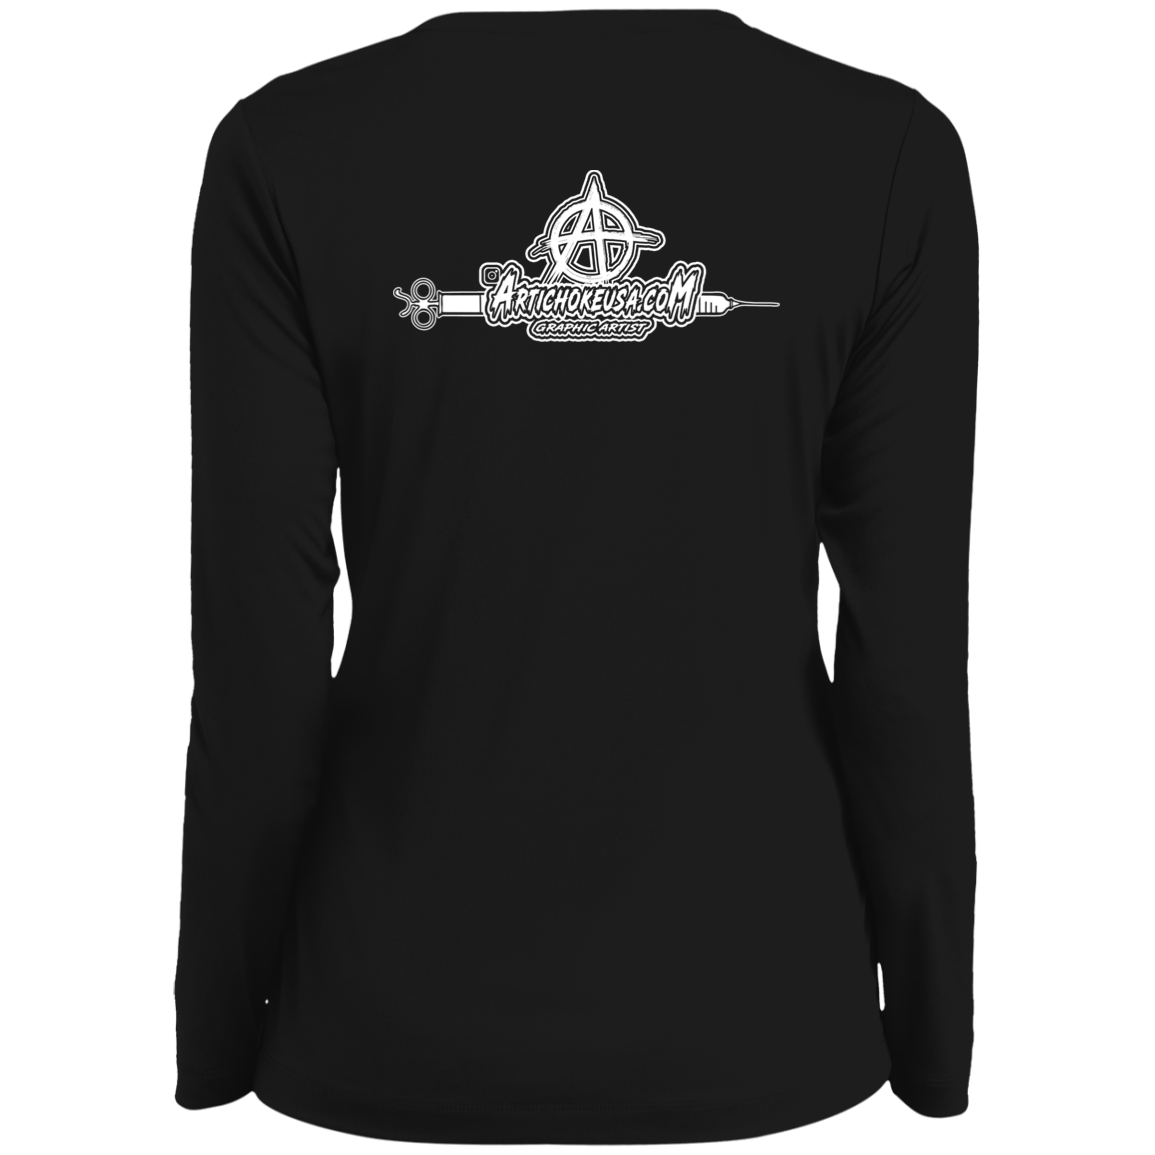 ArtichokeUSA Custom Design. Vaccinated AF (and fine). Ladies' Moisture-Wicking Long Sleeve V-Neck Tee